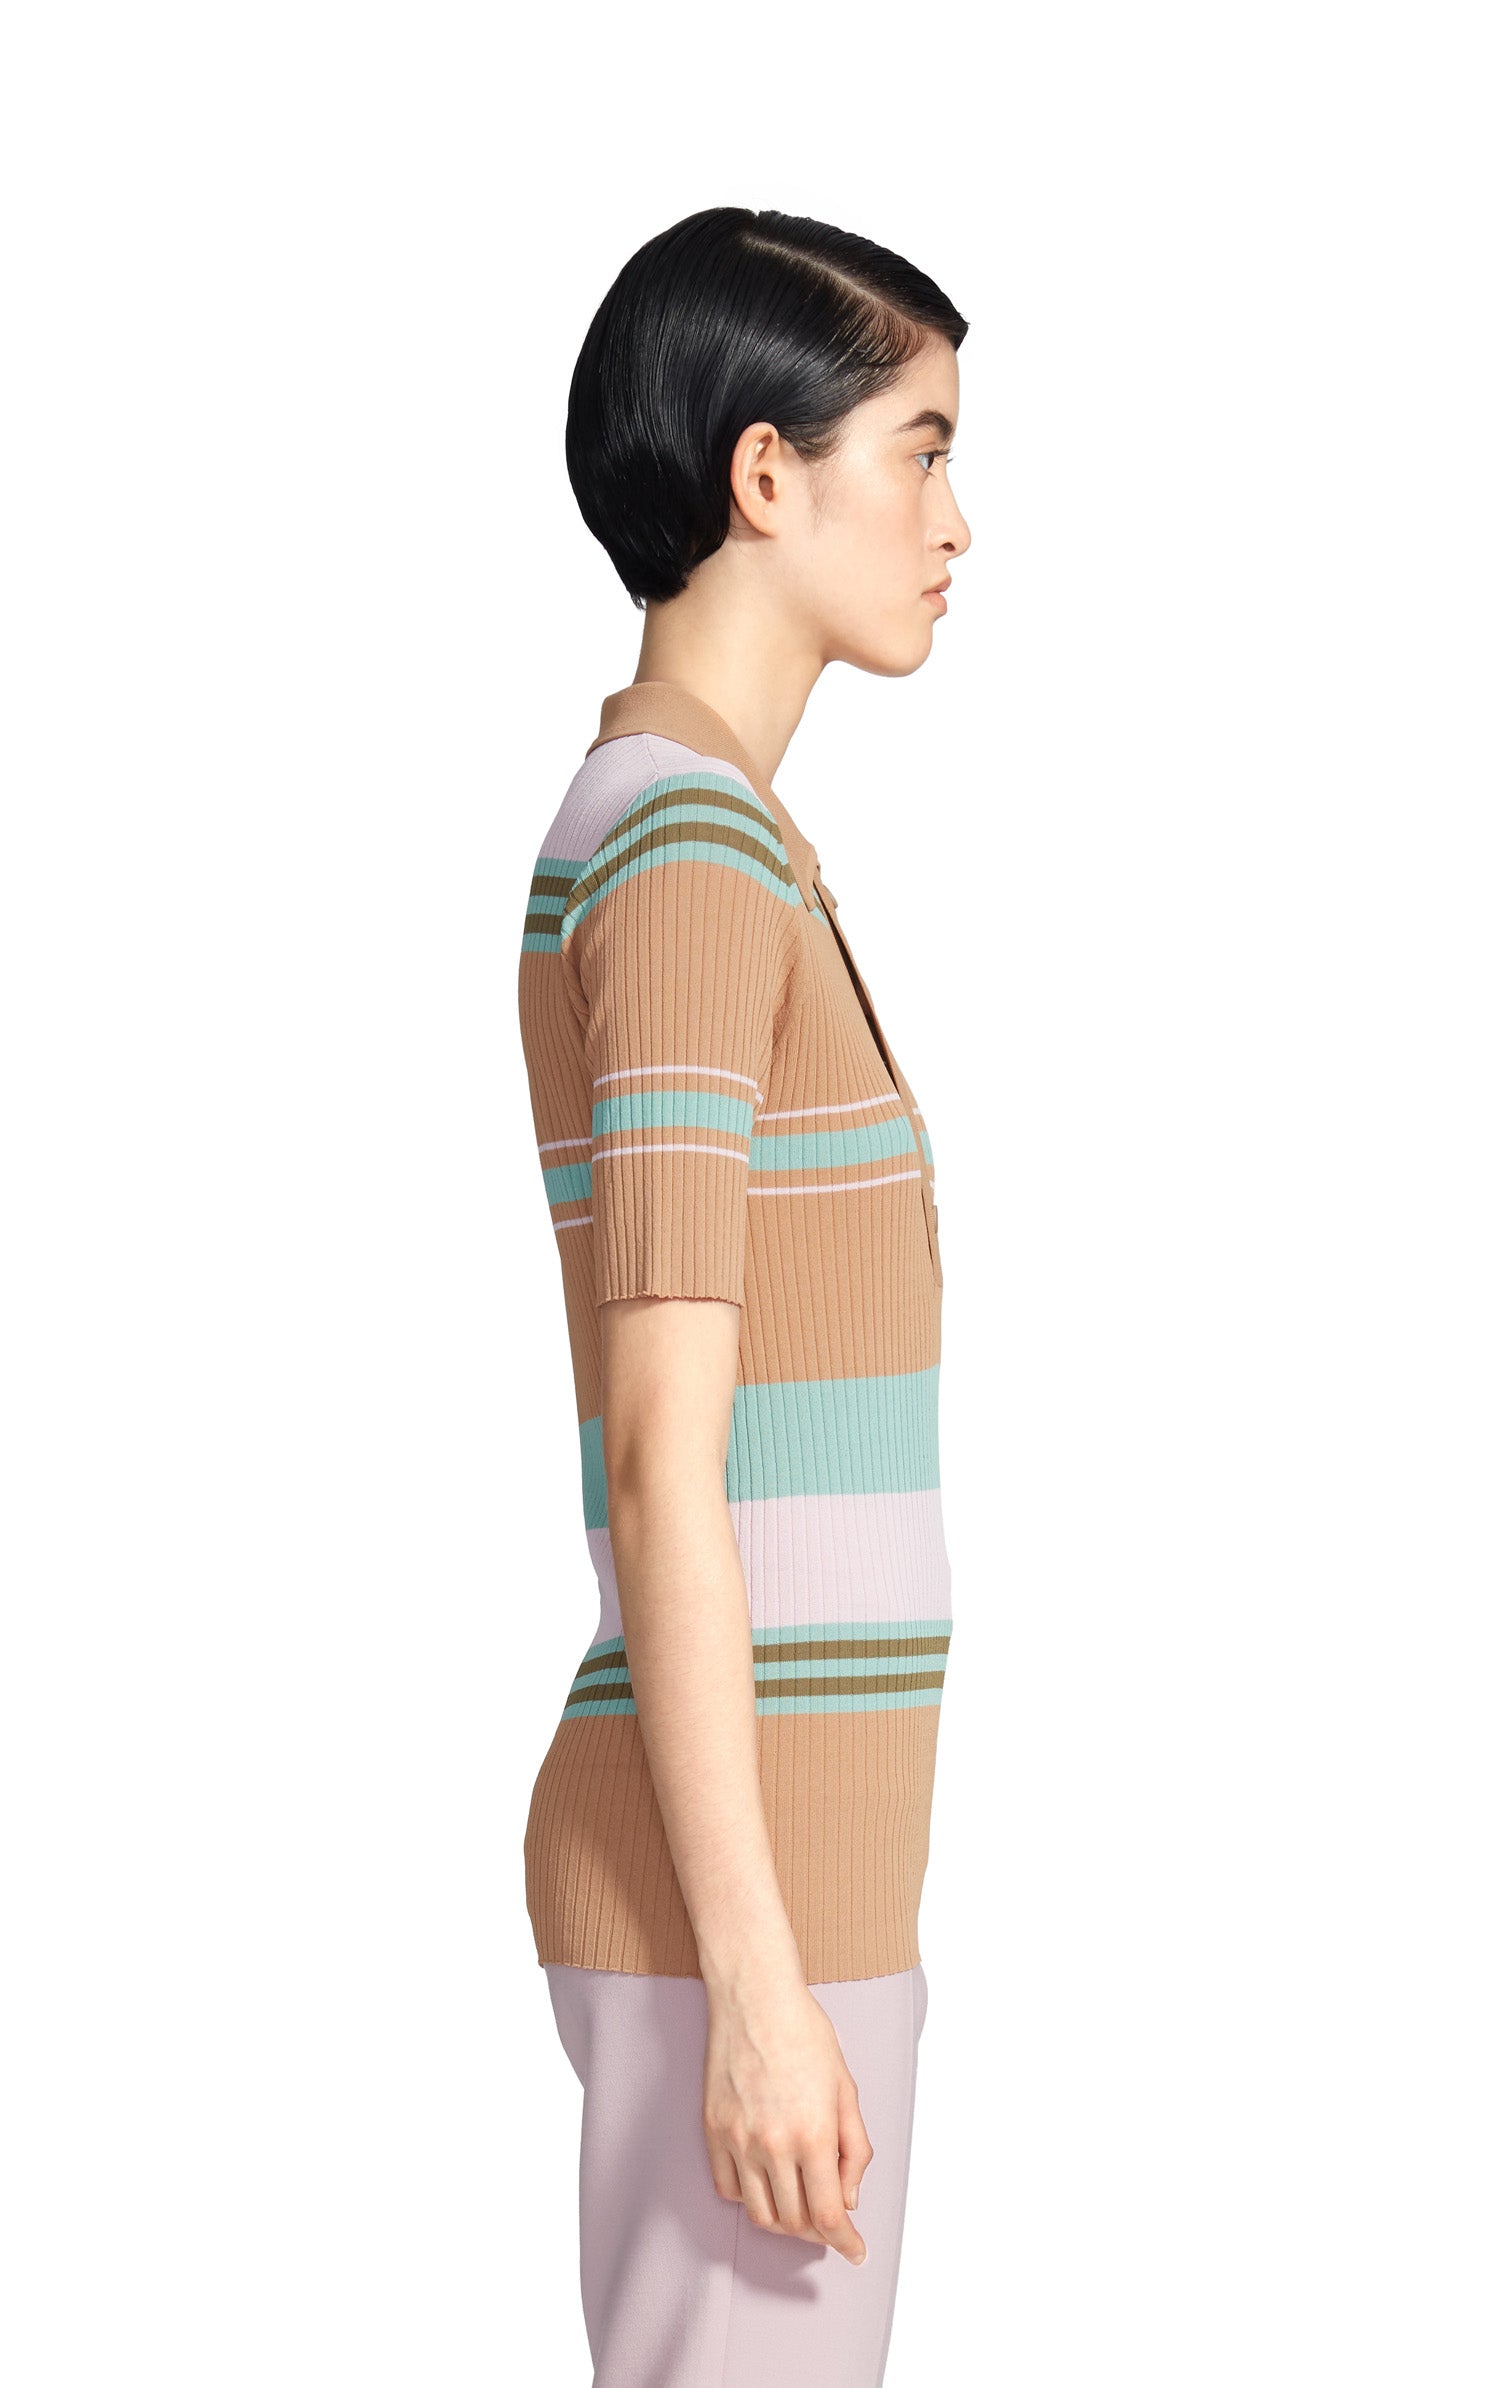 Rory Crepe Collared Short Sleeve Sweater